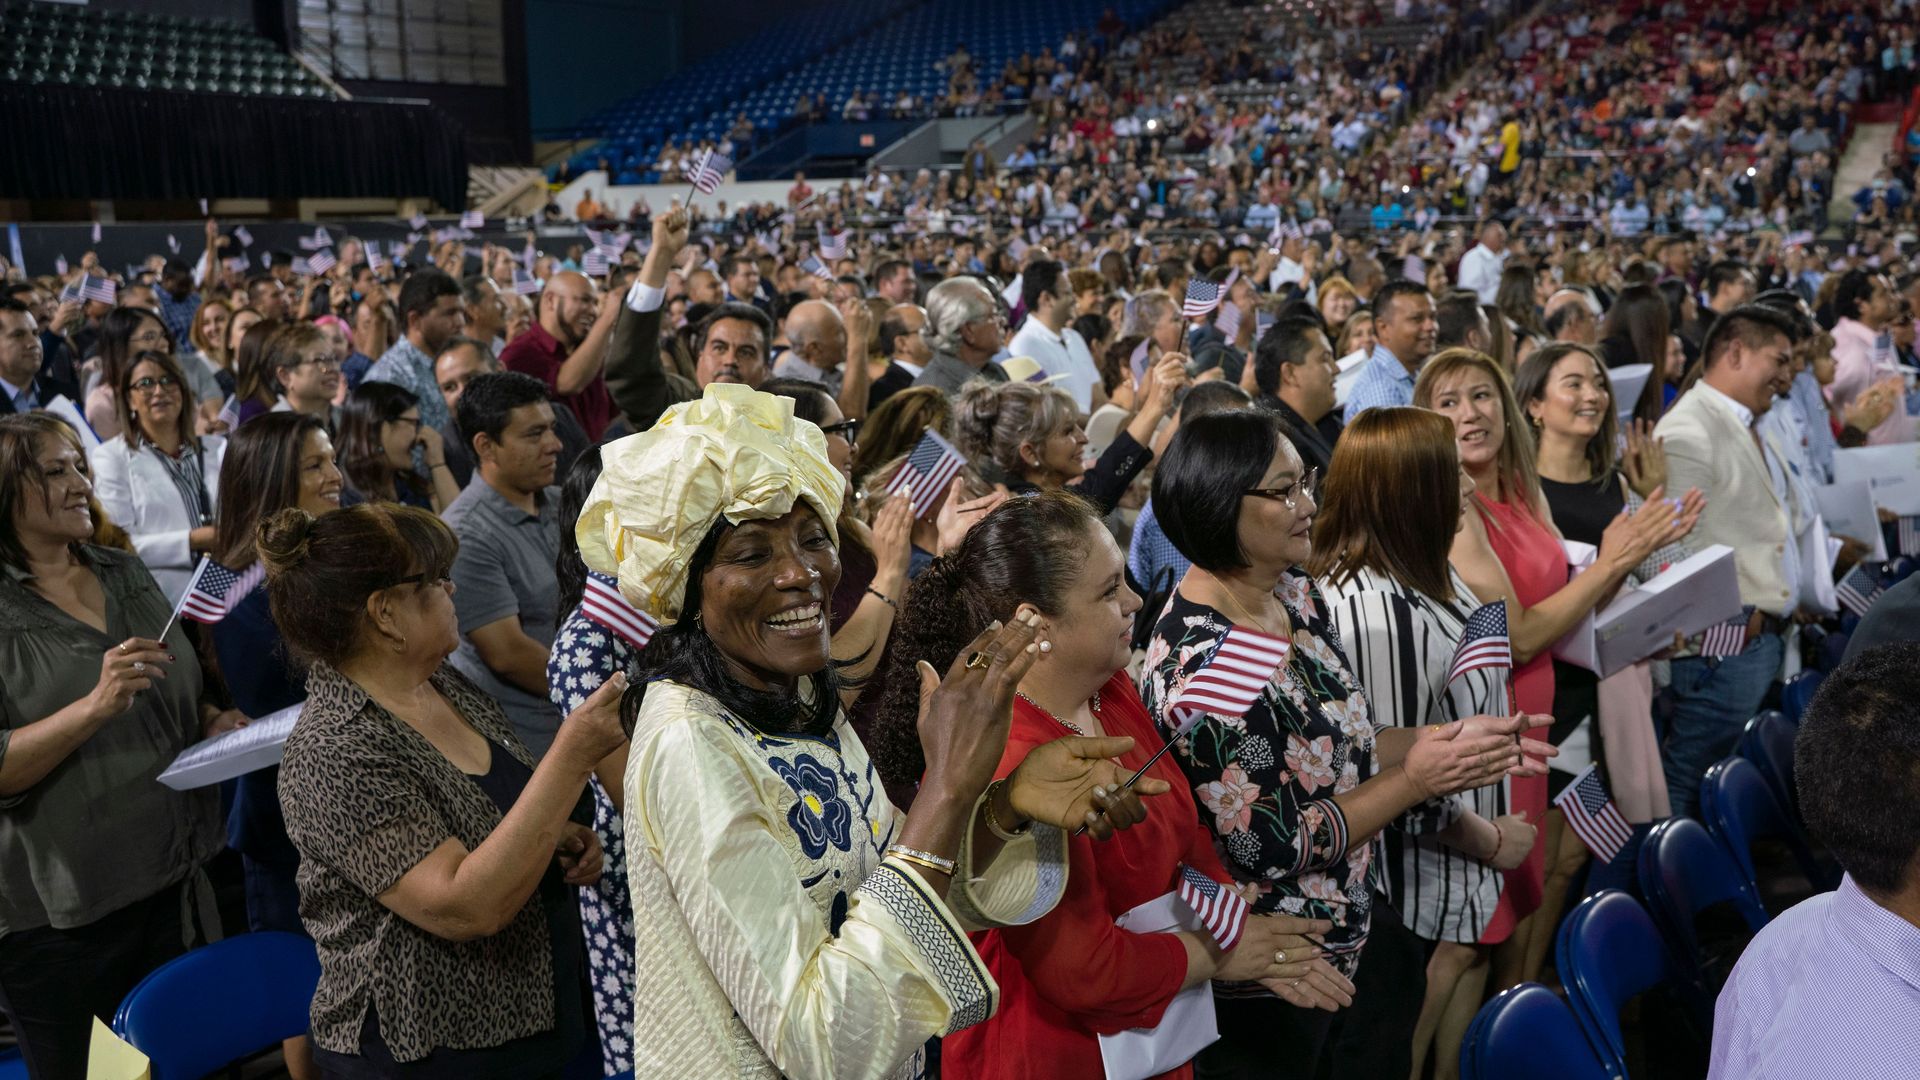 A diverse crowd of new Americans at a naturalization ceremony.